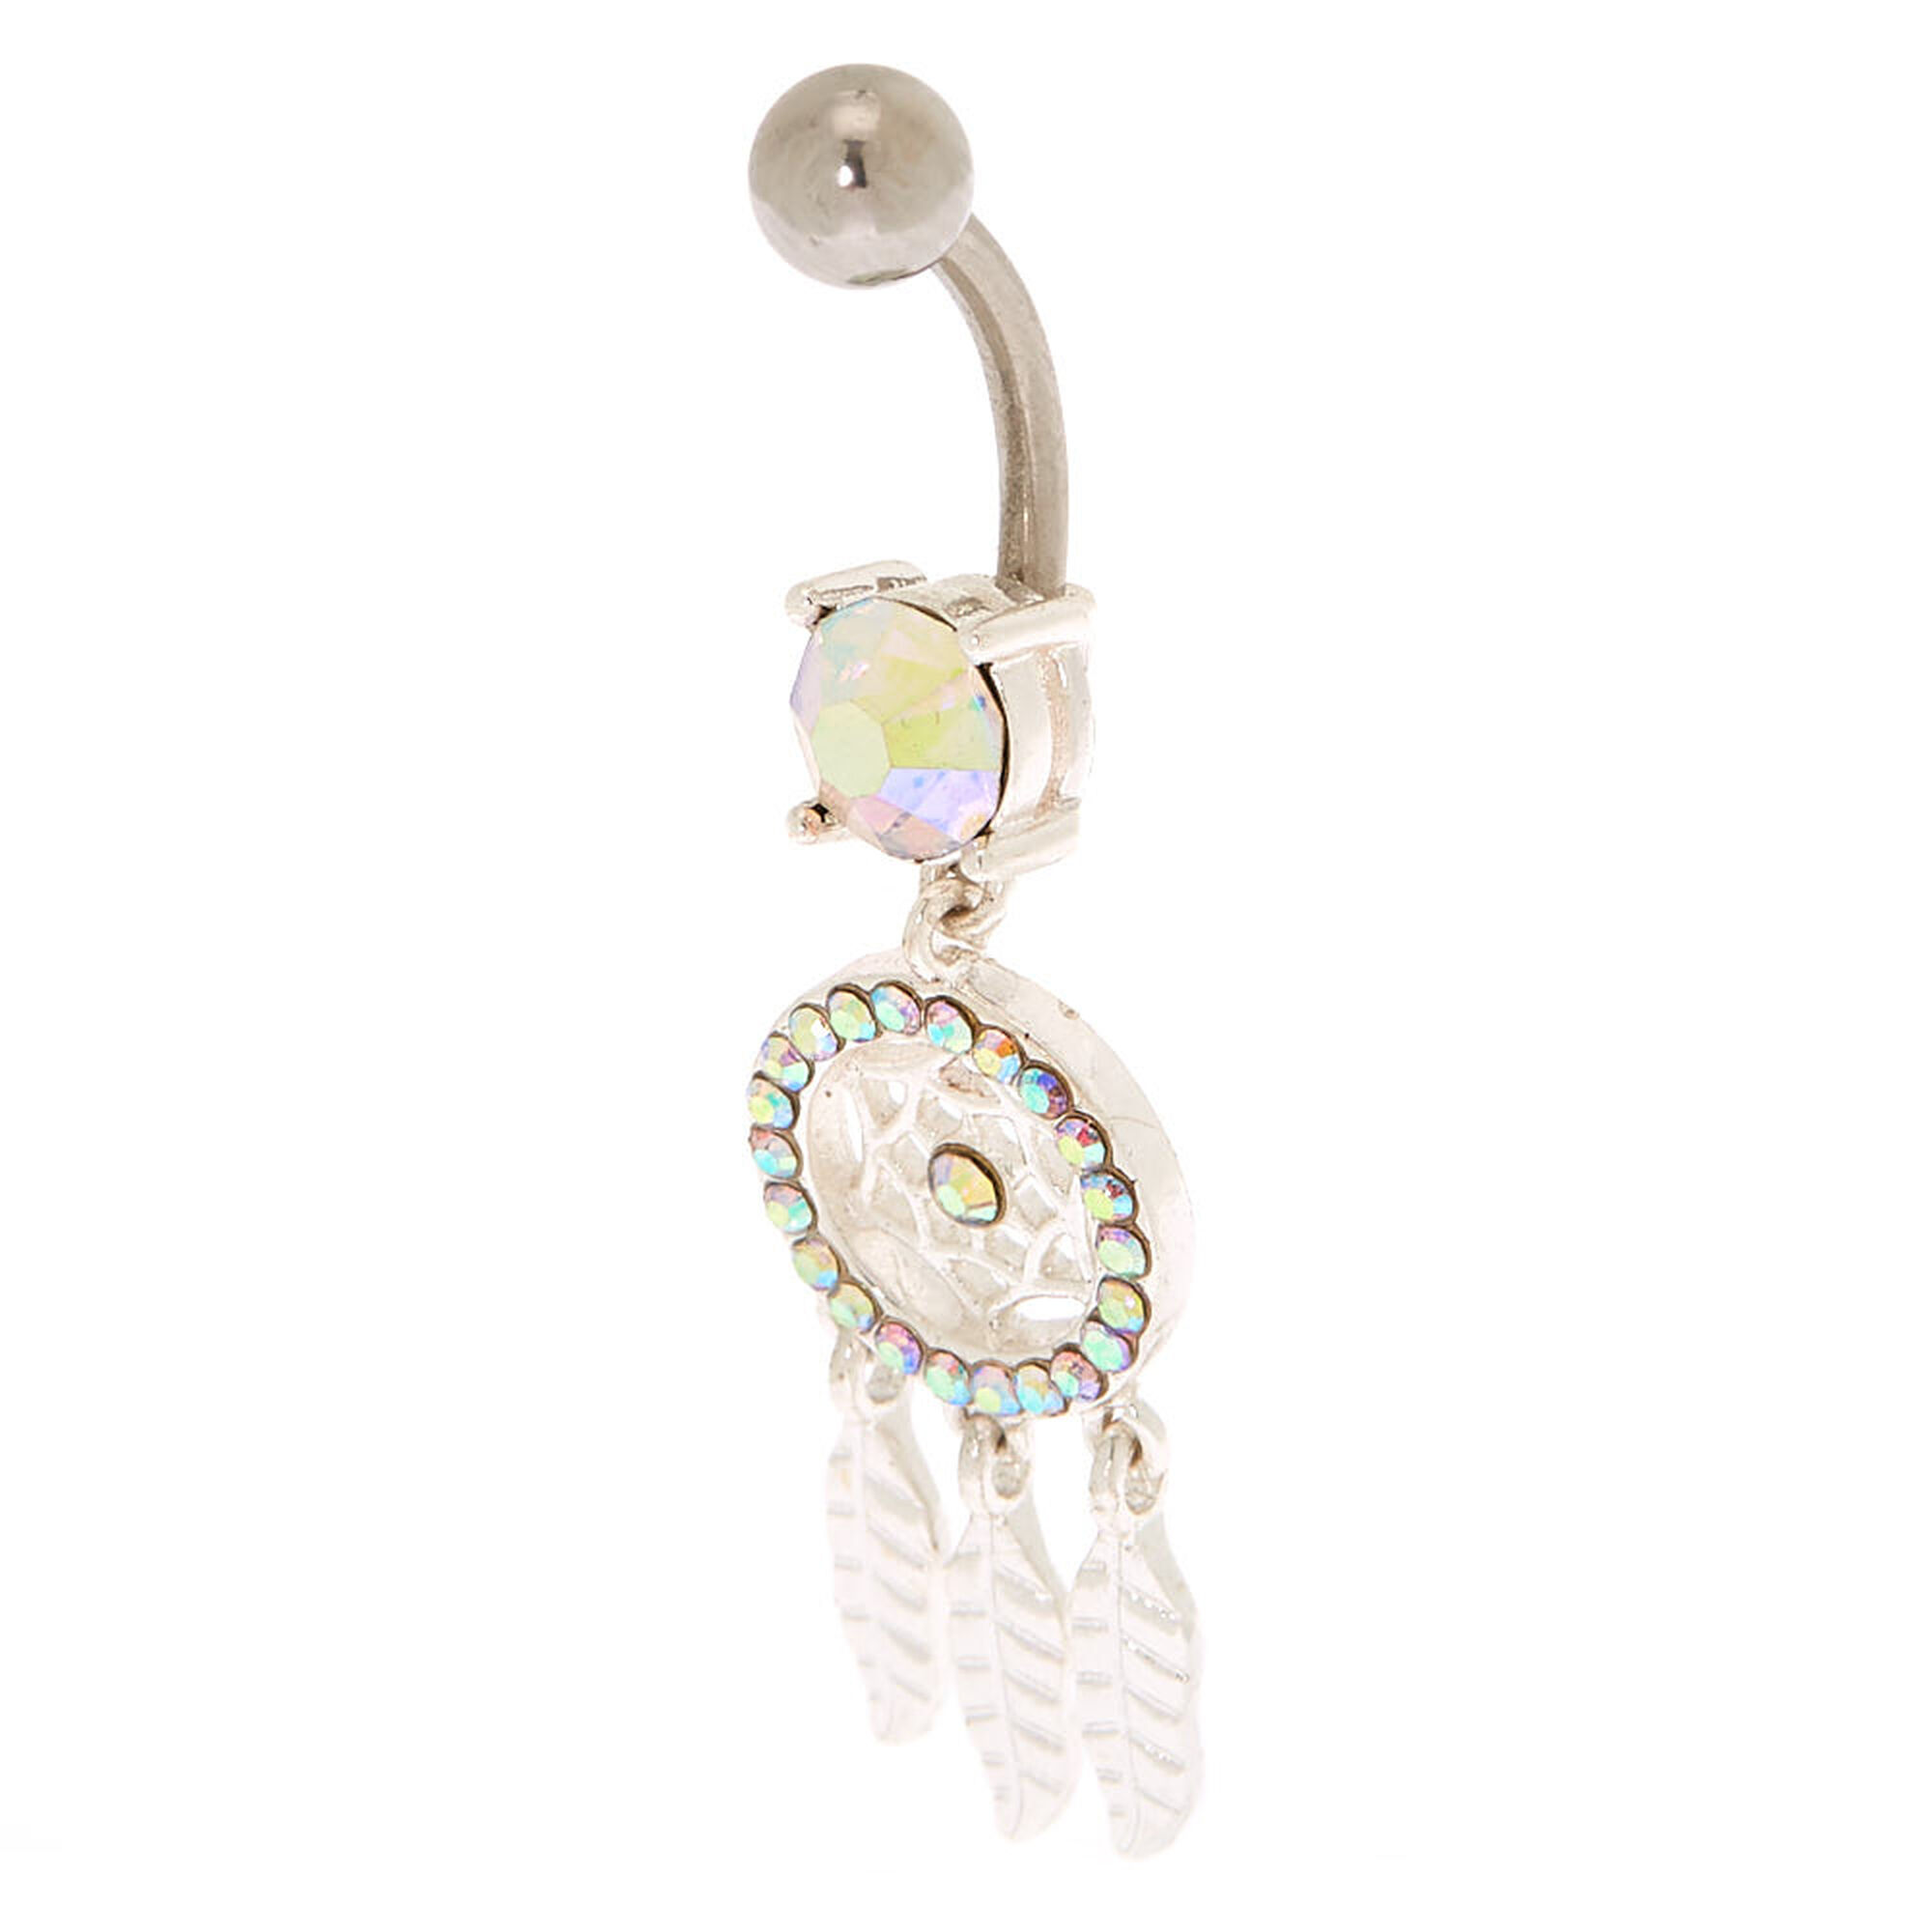 View Claires Tone 14G Iridescent Stone Dreamcatcher Belly Ring Silver information